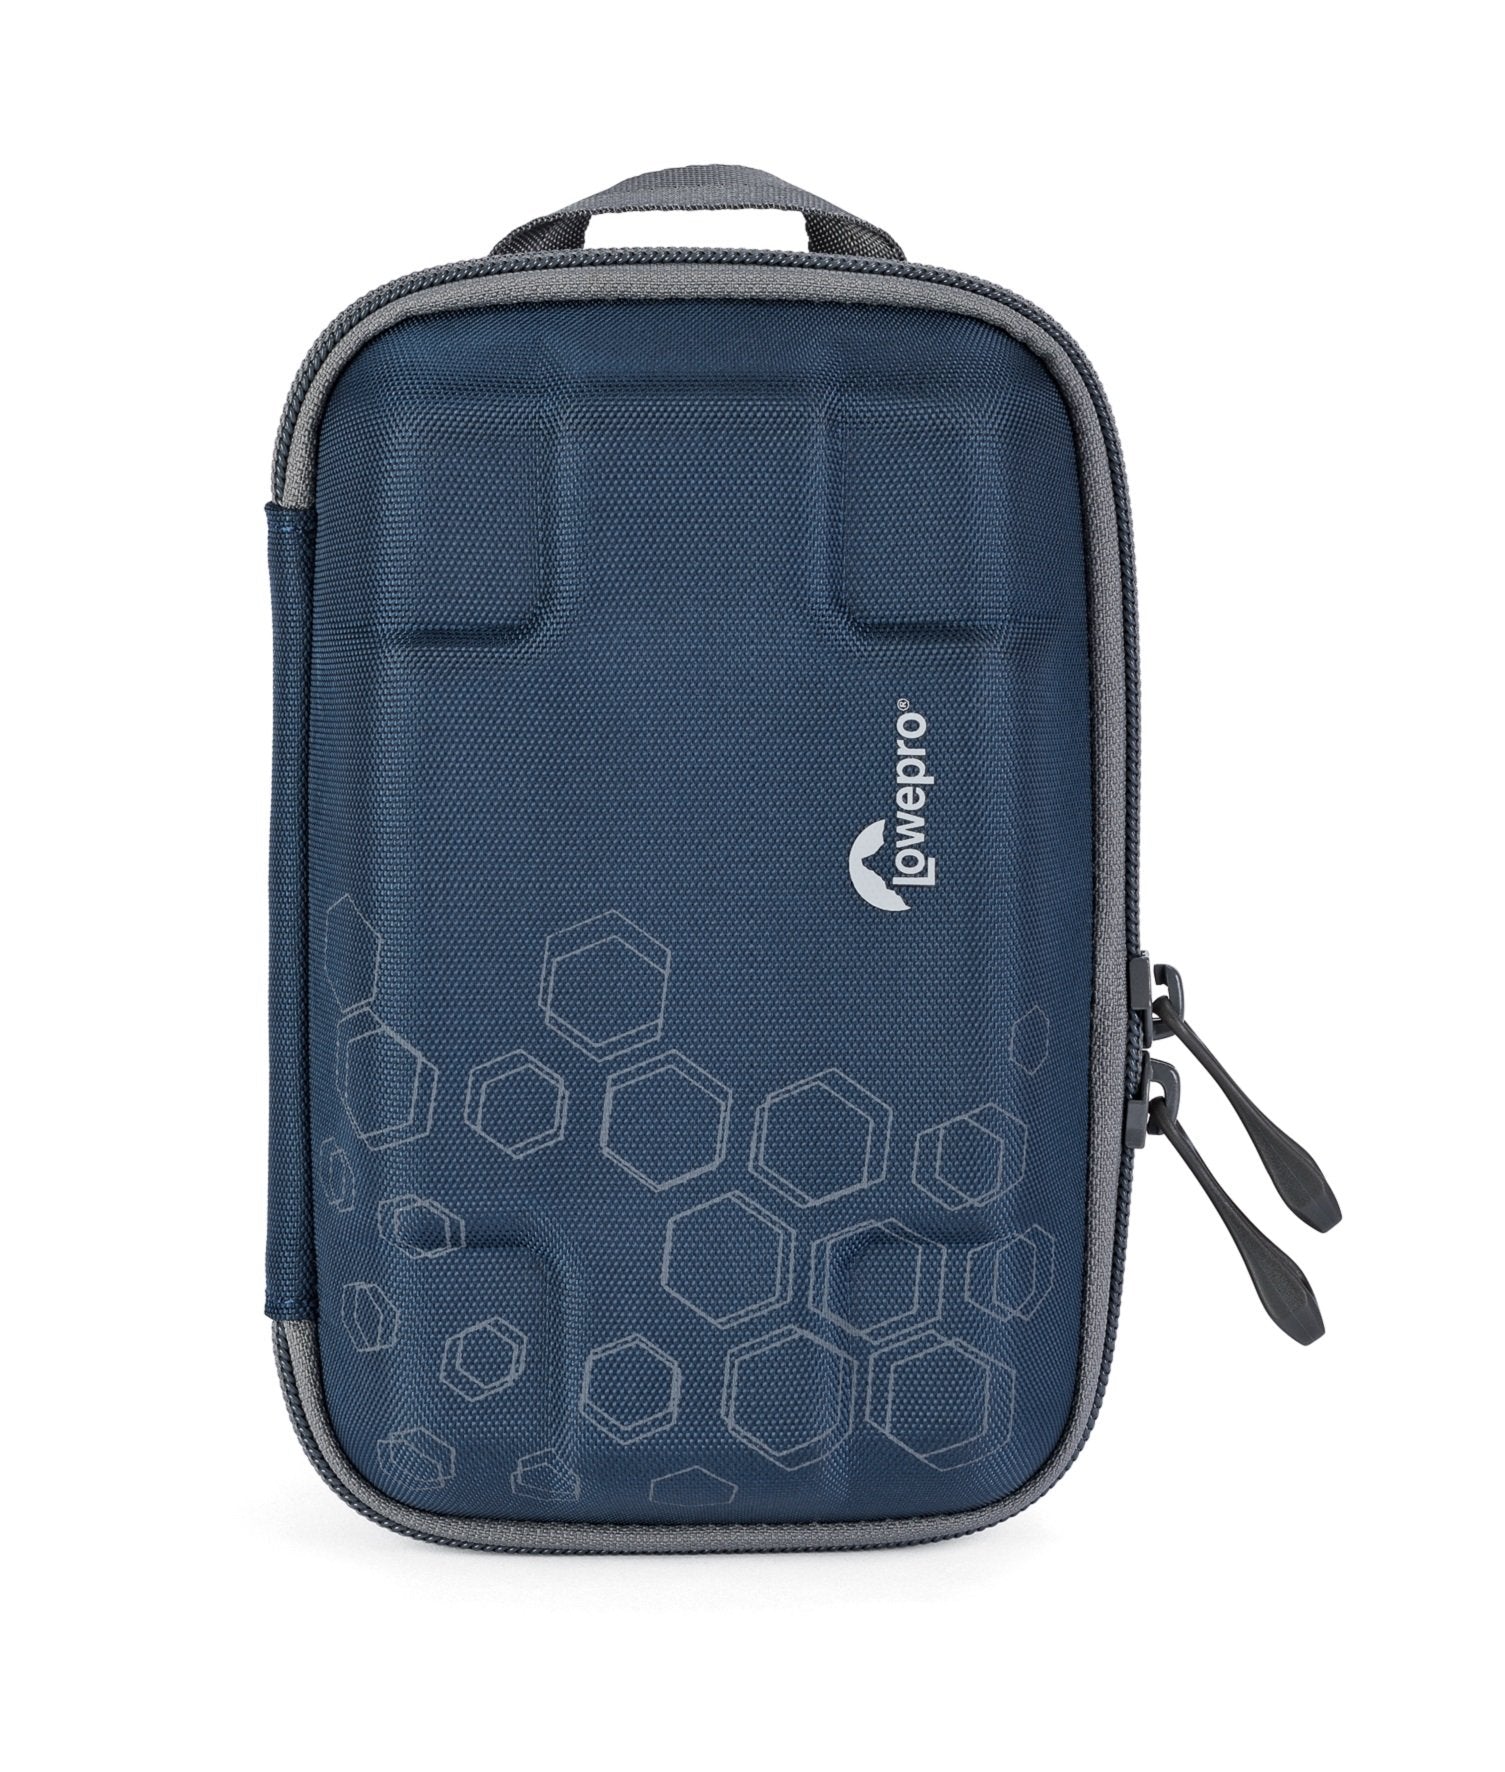 Dashpoint AVC1 GoPro Action Video Case From Lowepro ? Hard Shell Case For GoPro/Action Video Camera